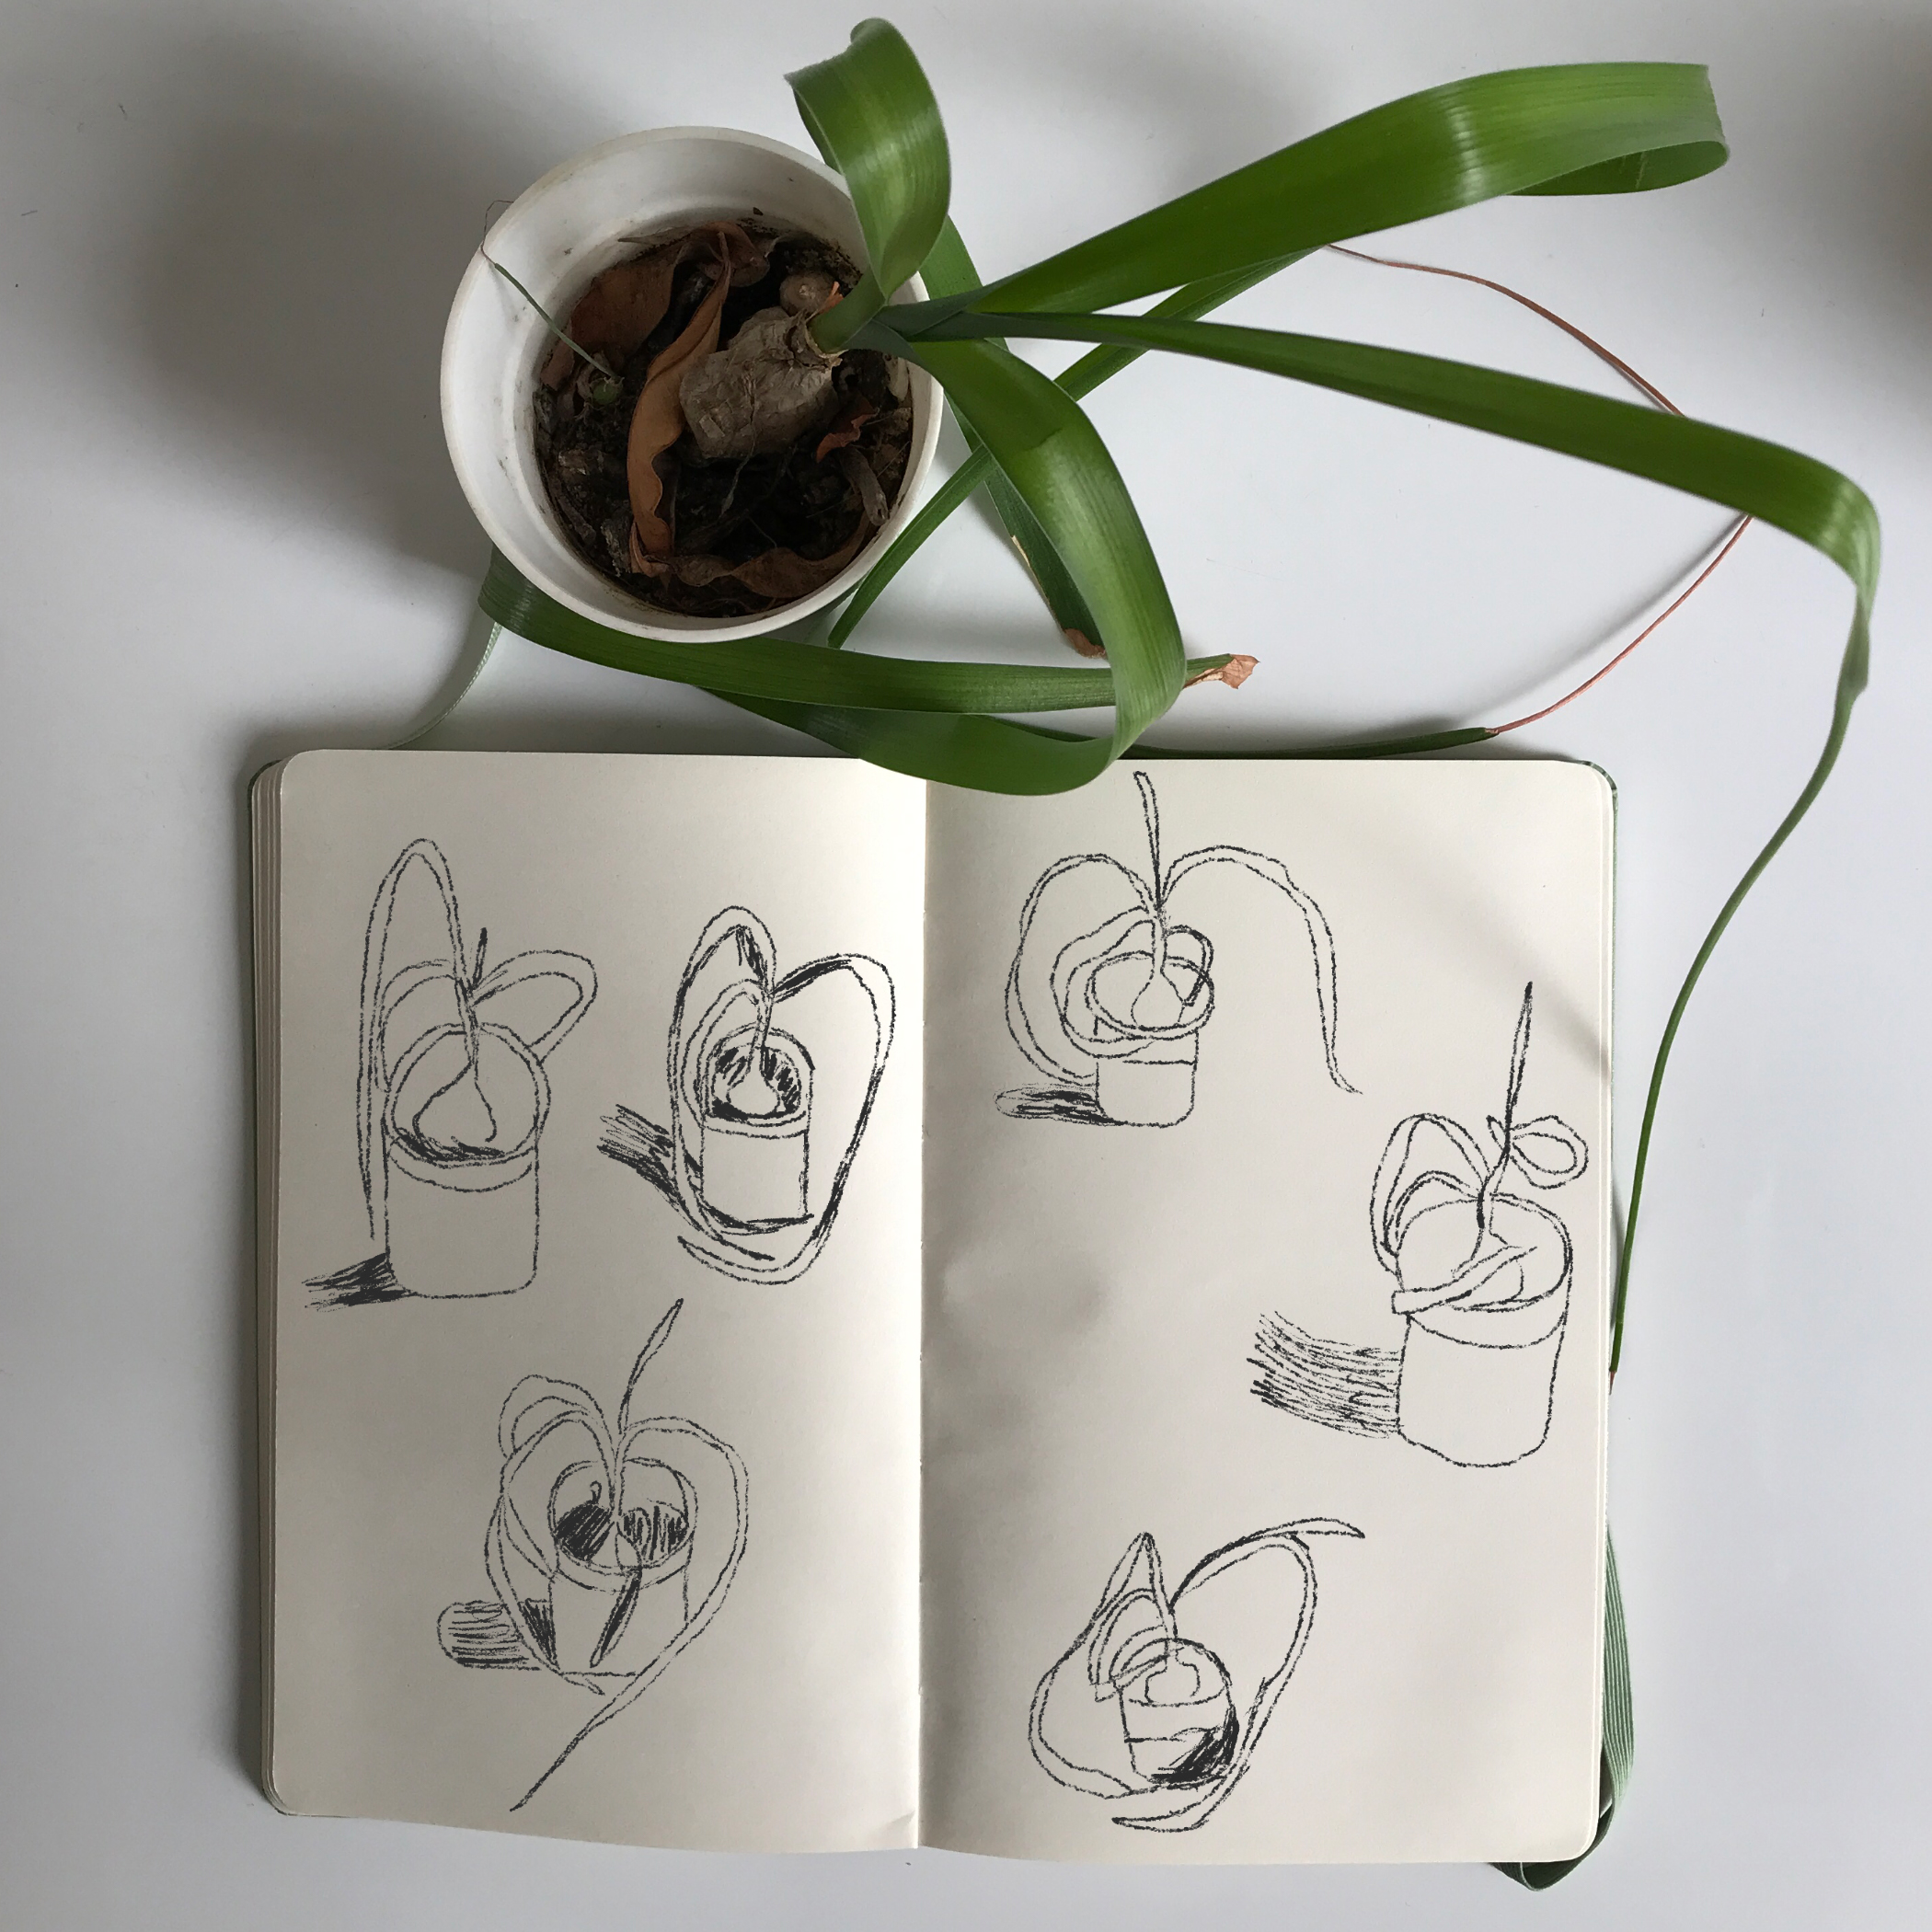 draw same object every day for self inspection